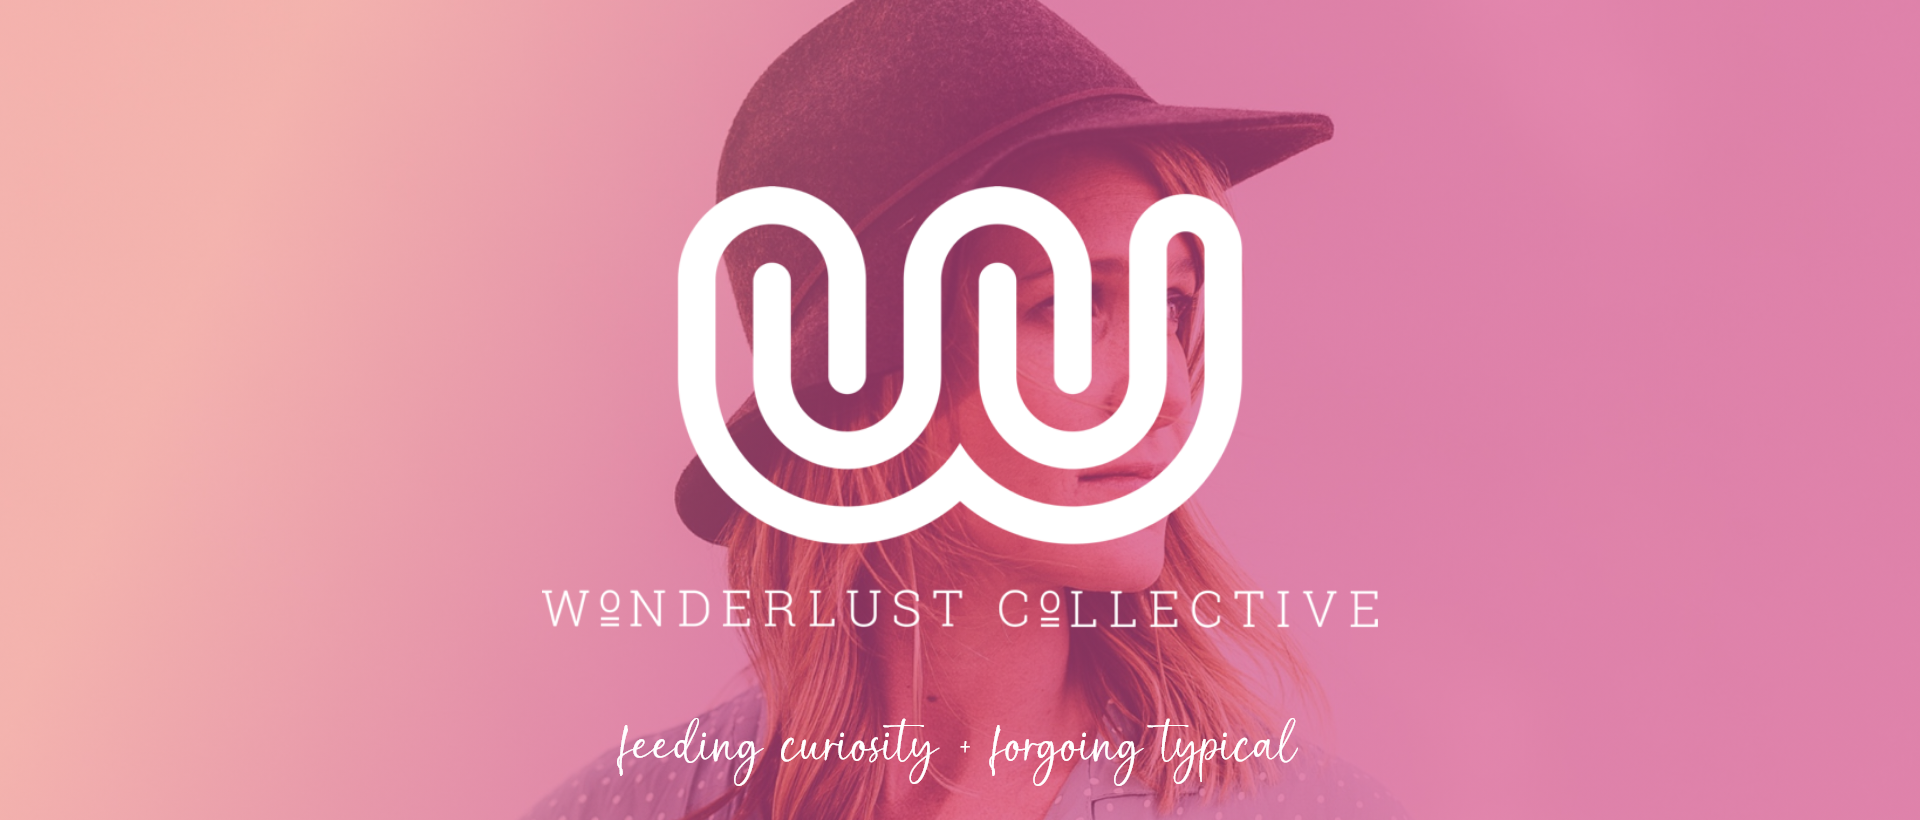 "Wonderlust Collective Feeding Curiosity Forgoing Typical" text over pink gradient woman looking off